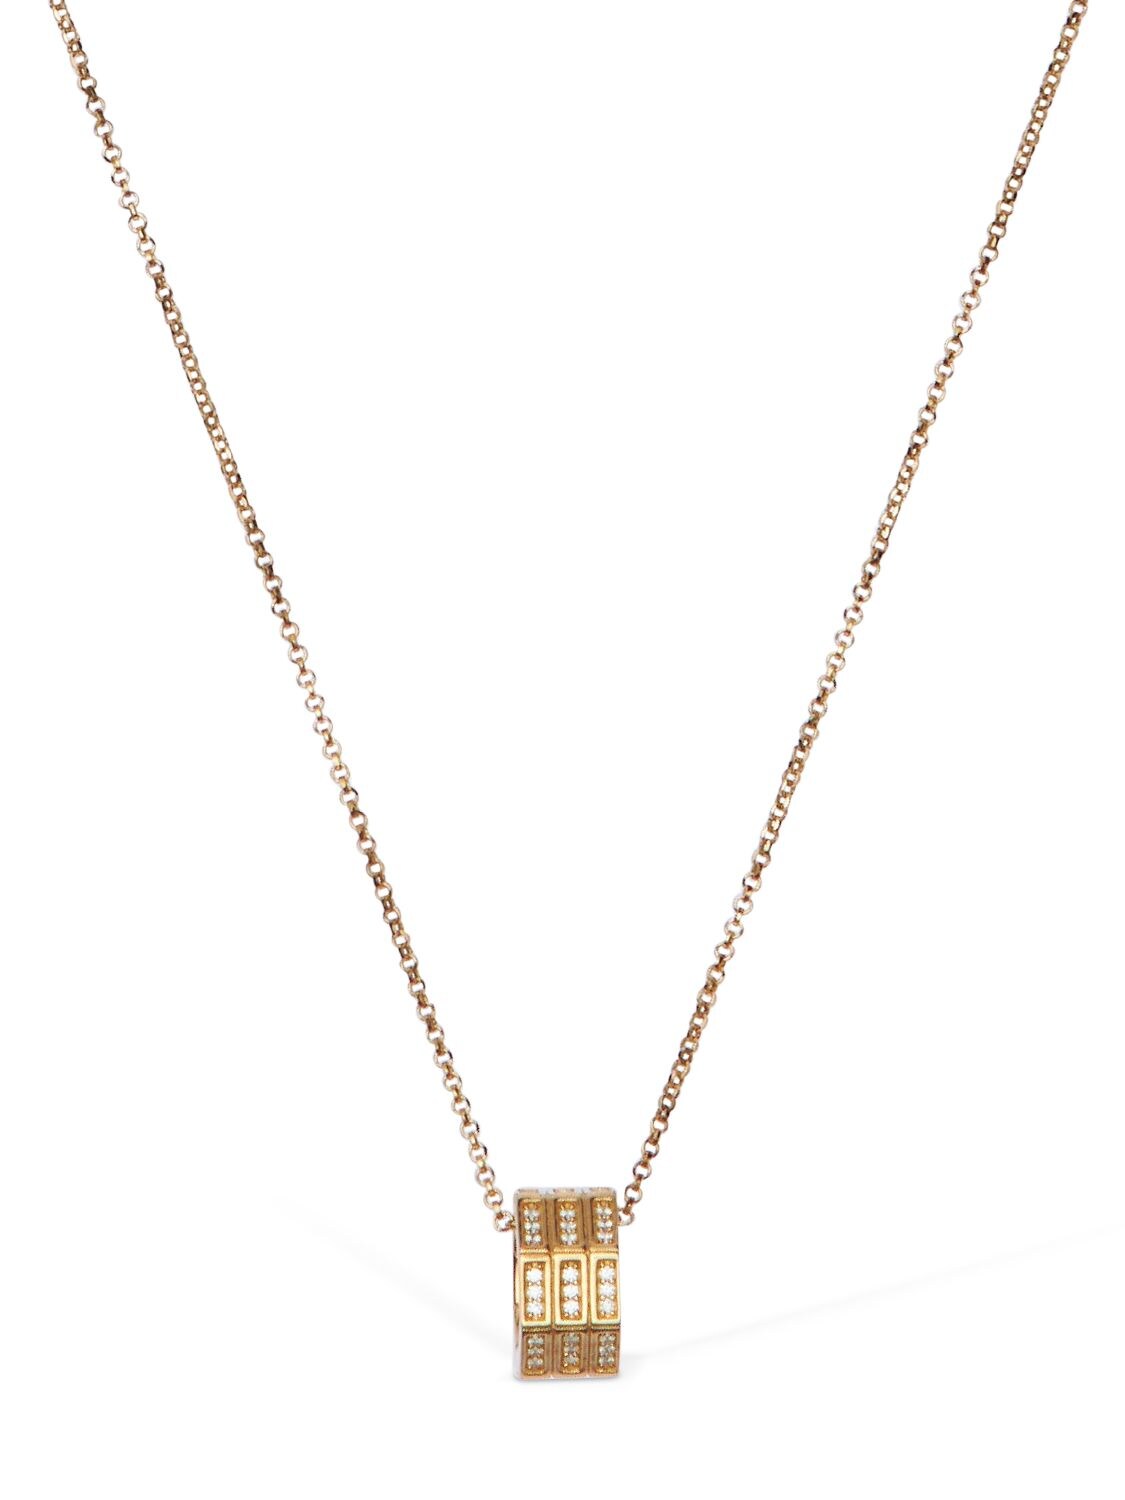 Apm Monaco Octagonal Paved Pendant Necklace In Gold,crystal